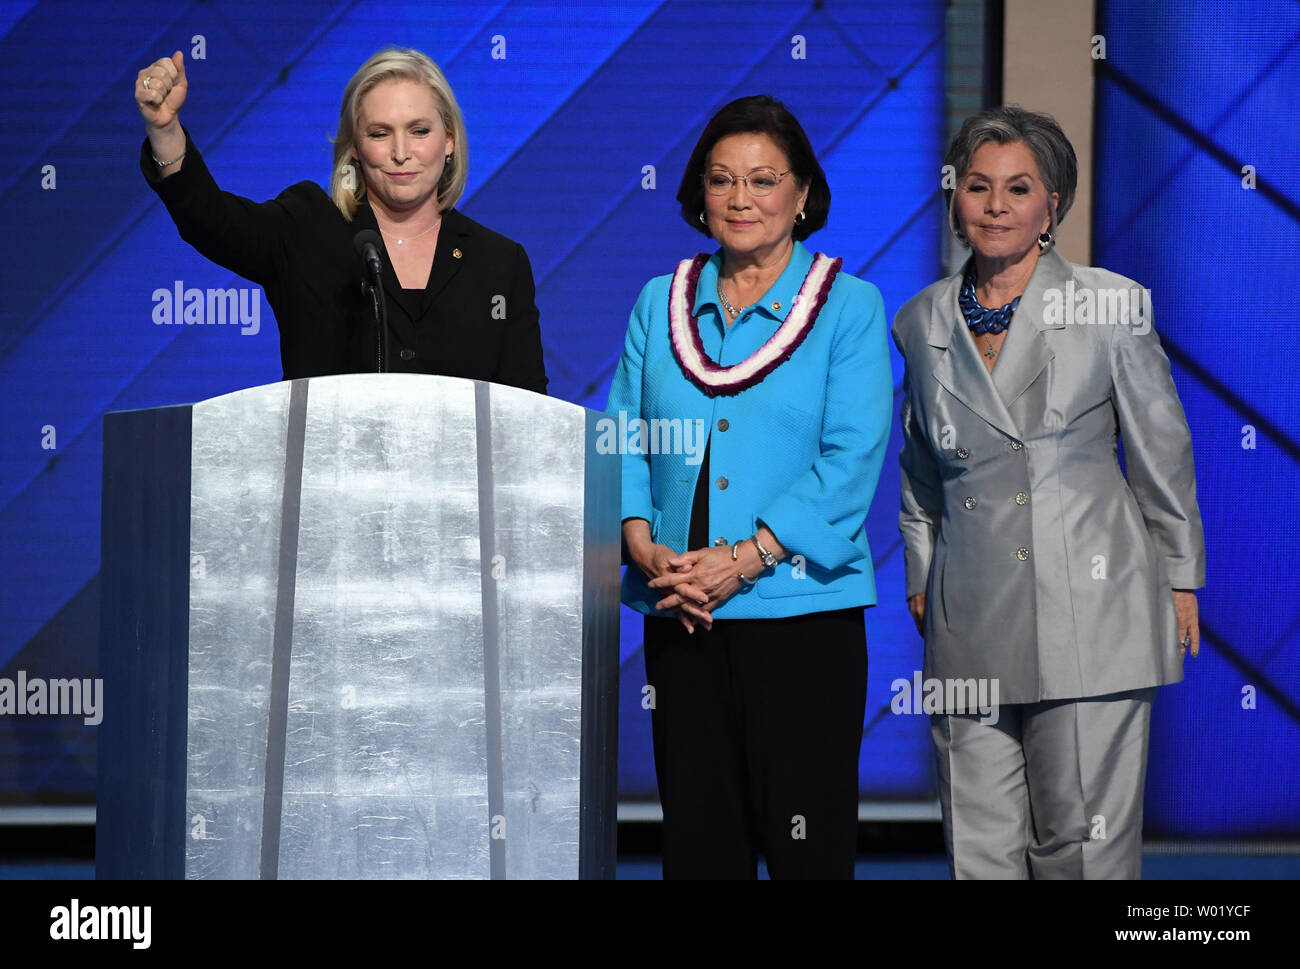 Senator Kirsten Gillibrand of New York, joined by Senators Mazie Hirono of  Hawaii and Barbara Boxer of California, addresses delegates on day four of  the Democratic National Convention at Wells Fargo Center